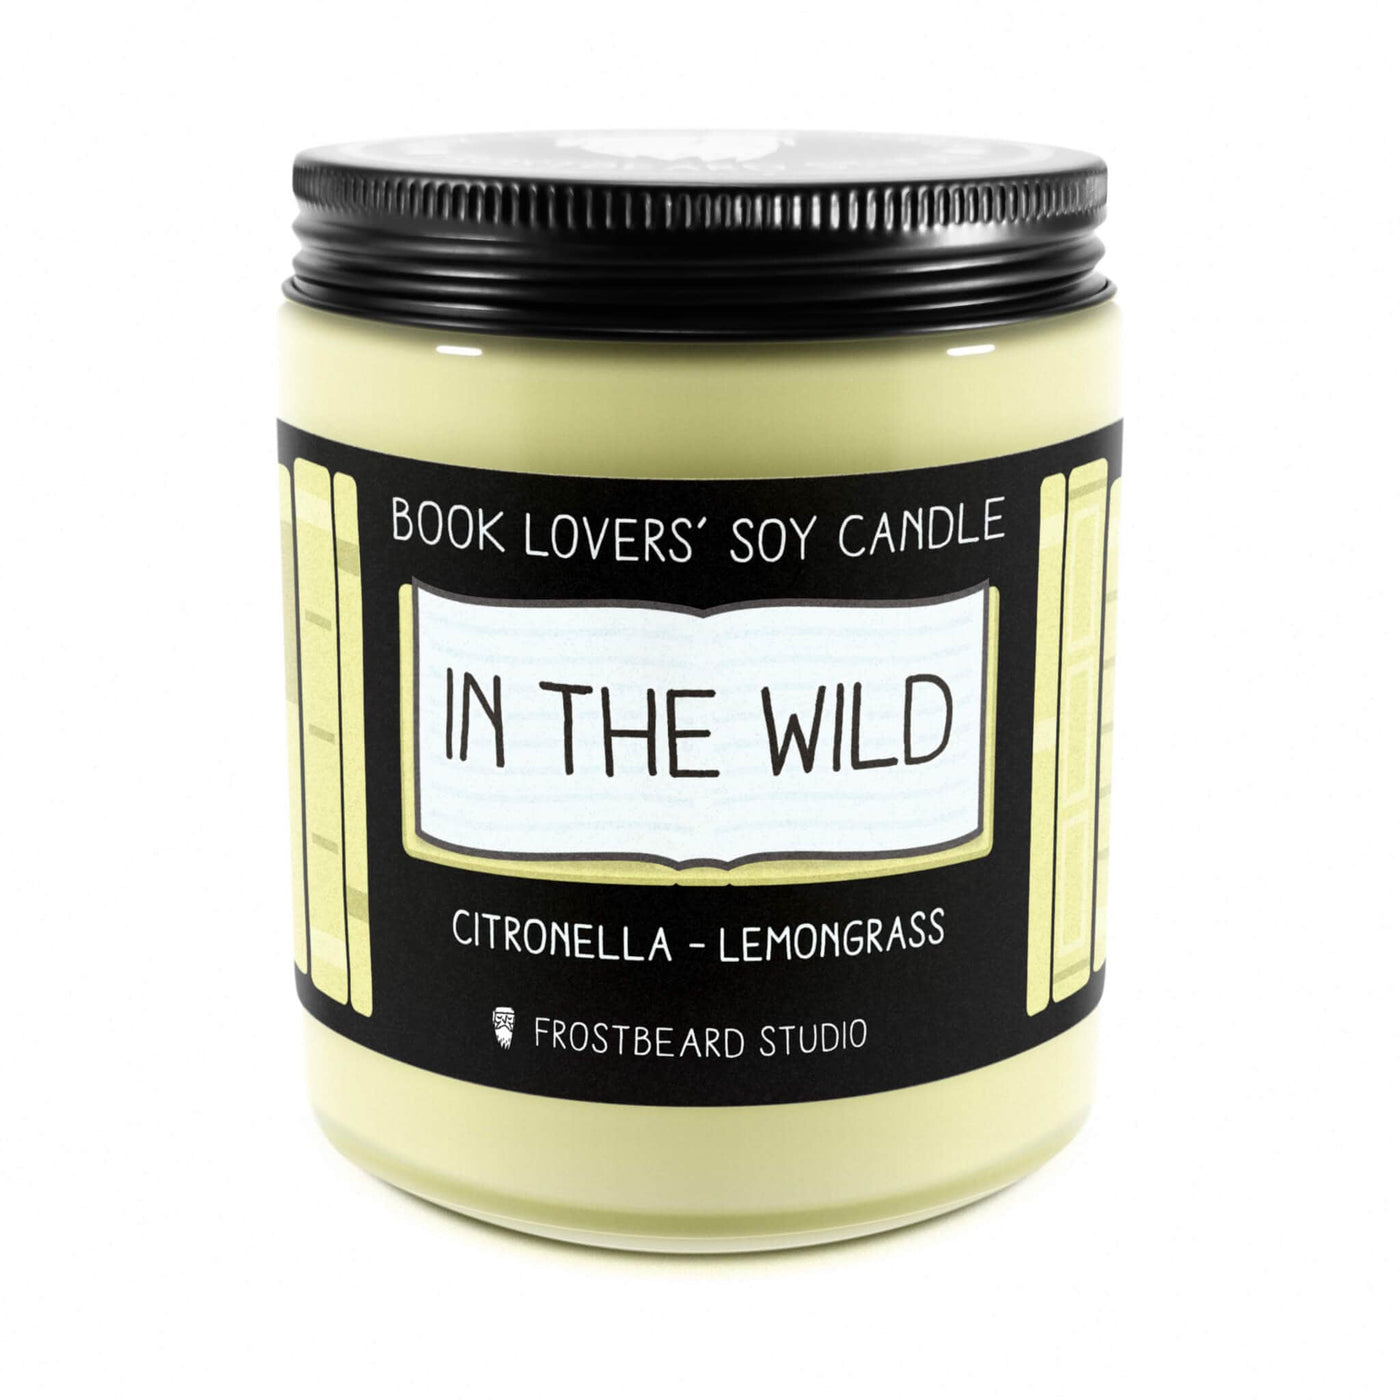 In the Wild - 8 oz Jar - Book Lovers' Soy Candle - Frostbeard Studio